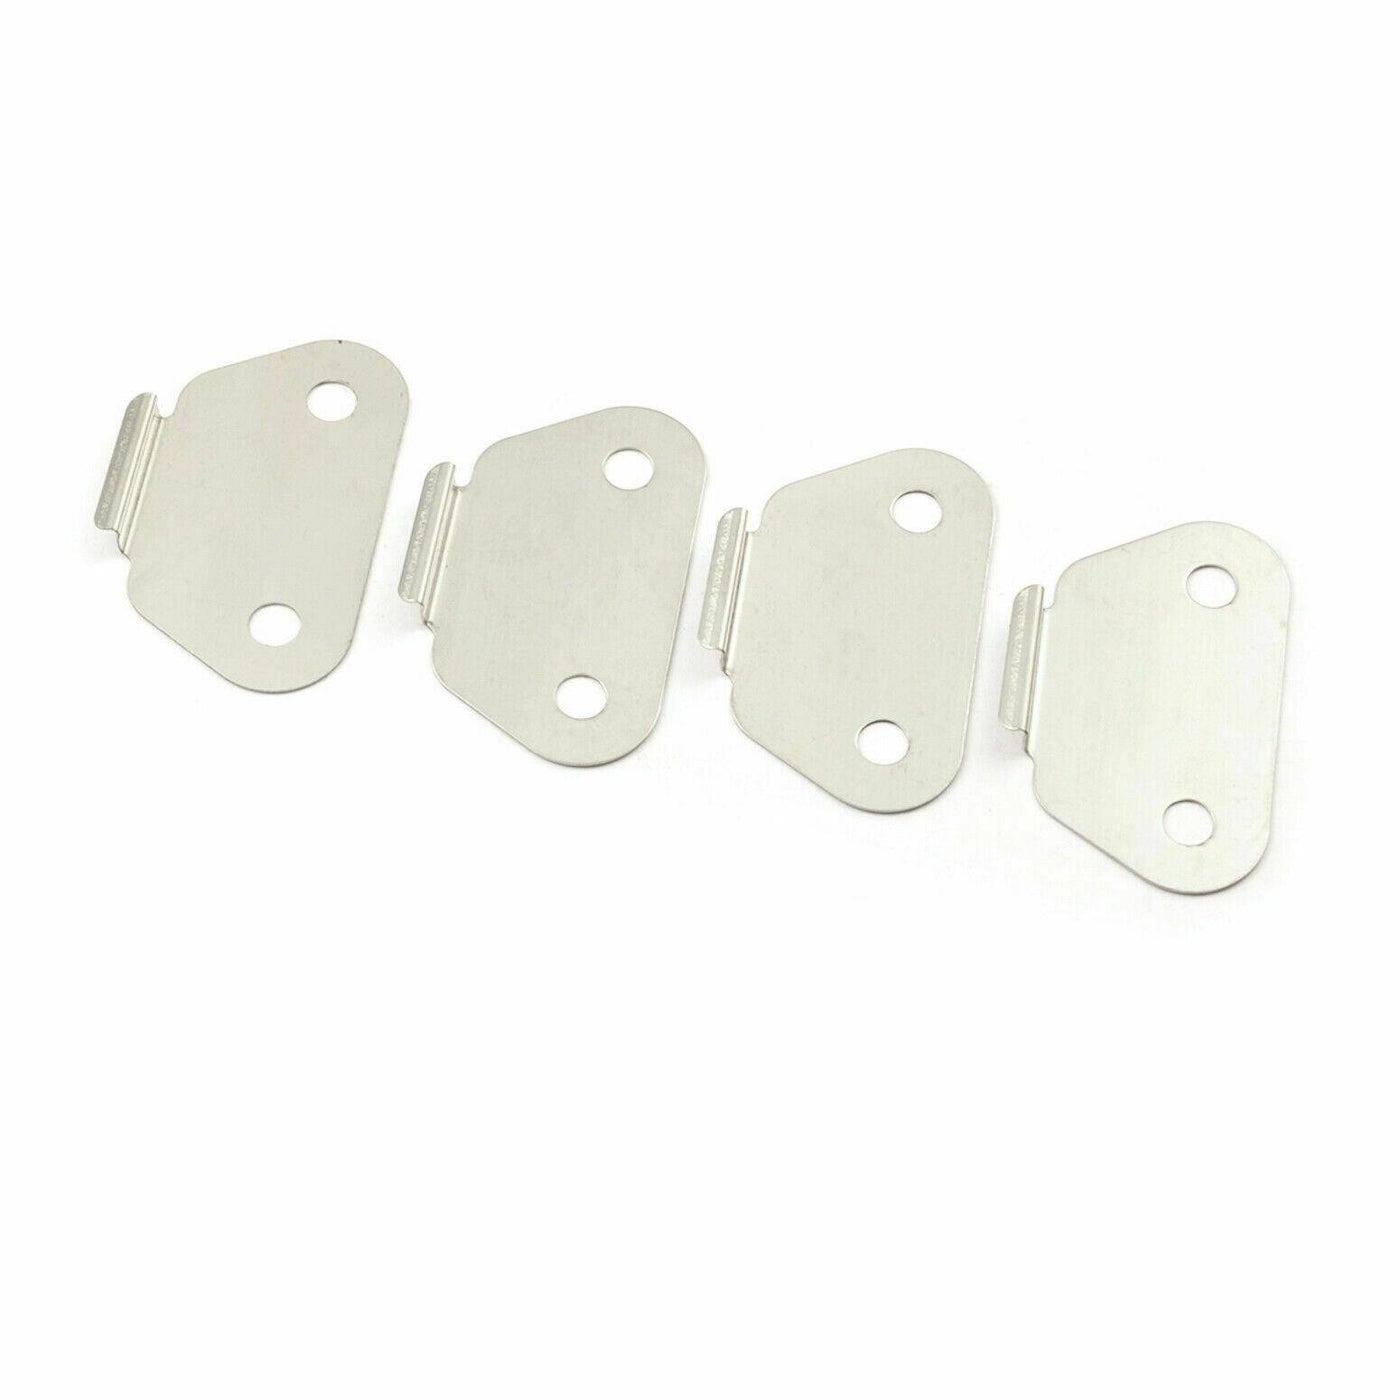 Saddlebags Lid Wear Strike Plates Kit Fit for Harley Road Electra Glide 1993-13 - Moto Life Products